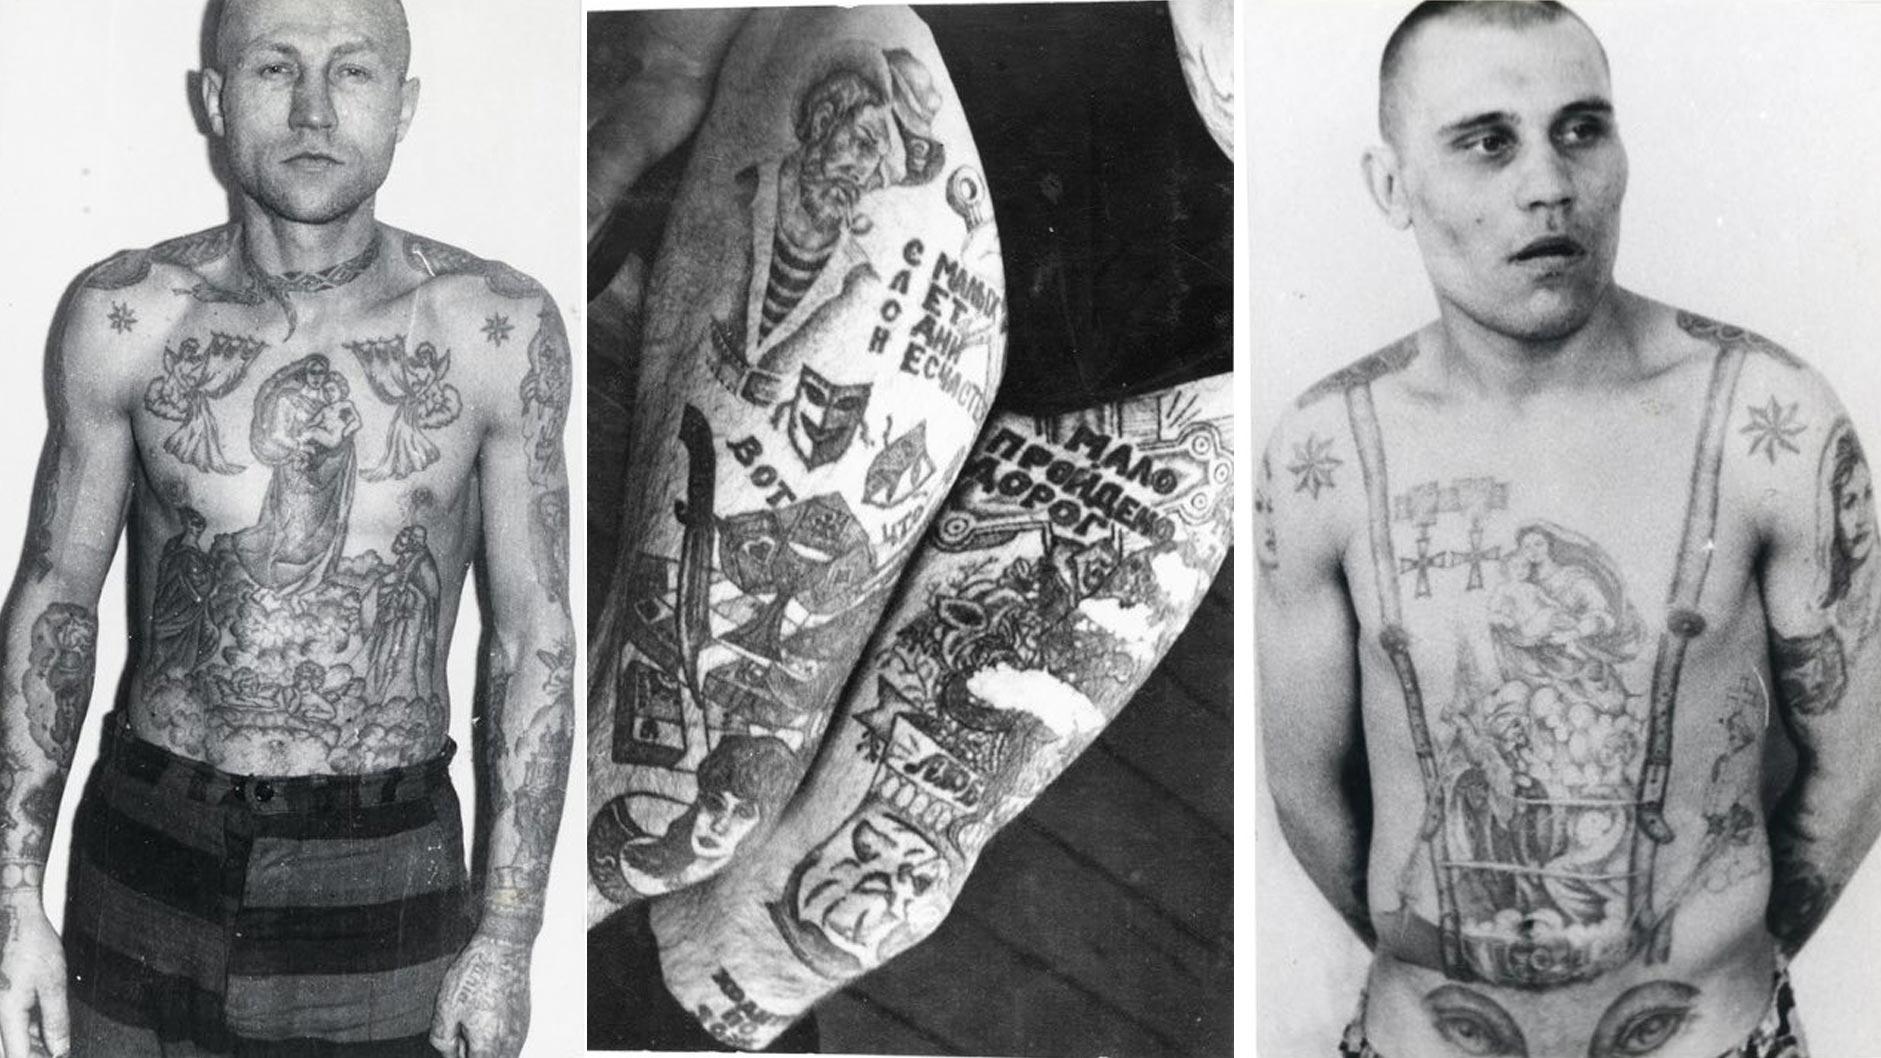 Russian Prisoners Tattoos and their Gambling Gangs  Tattoo Ideas  Artists and Models